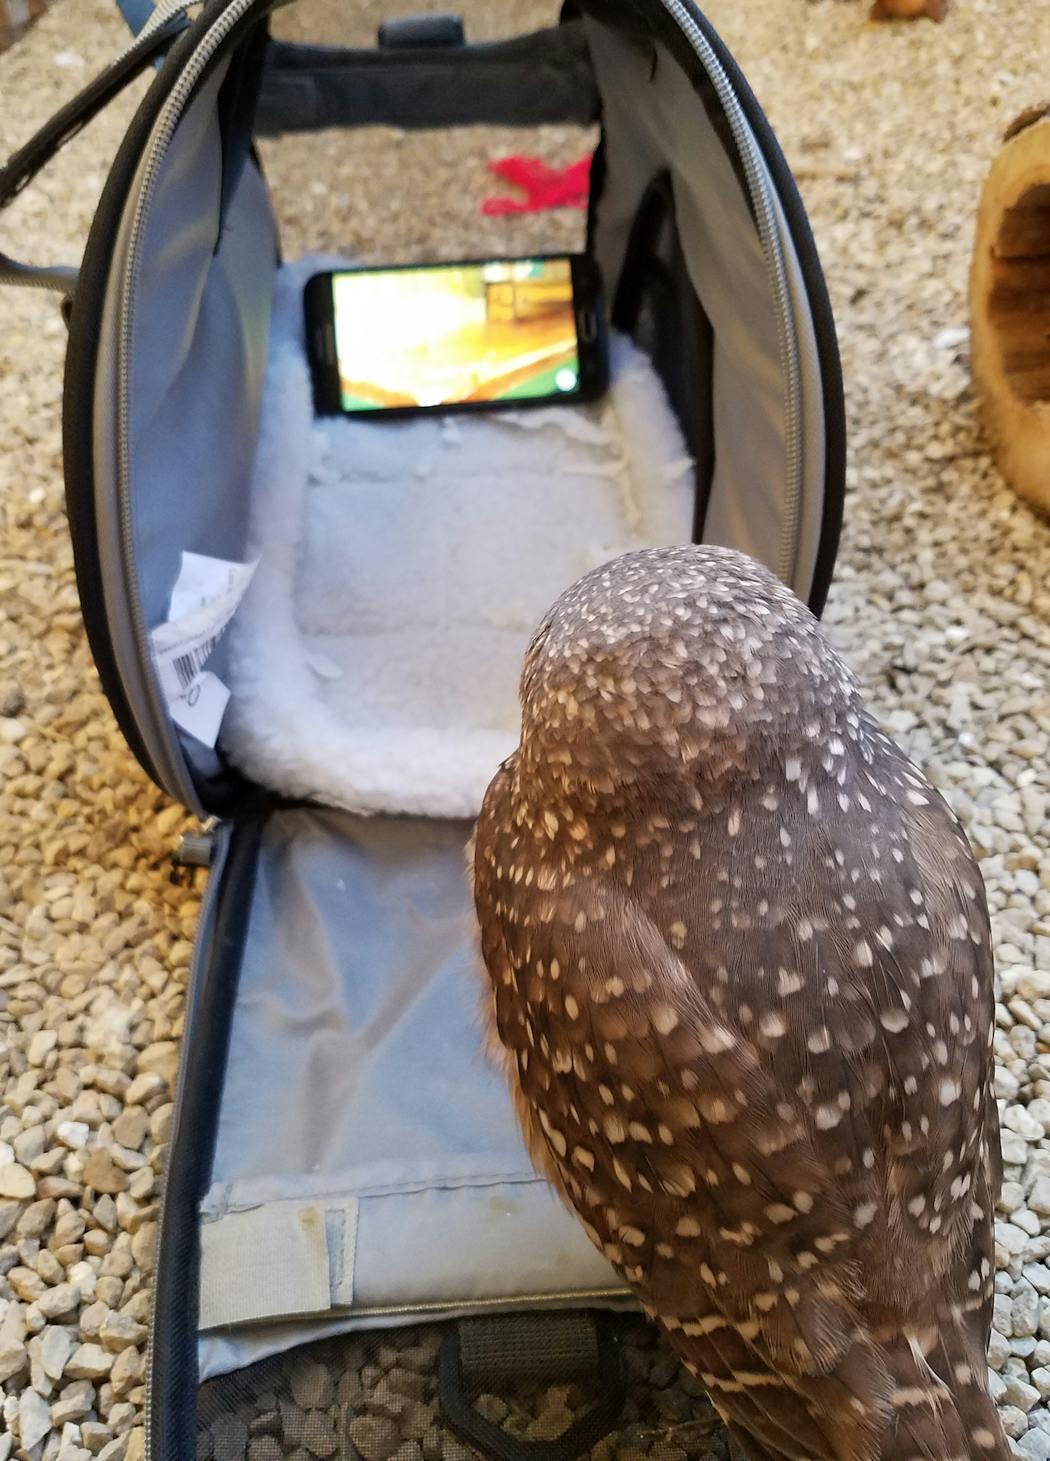 Bea the burrowing owl is drawn to videos on a cellphone as a means to entice her into her carrier.